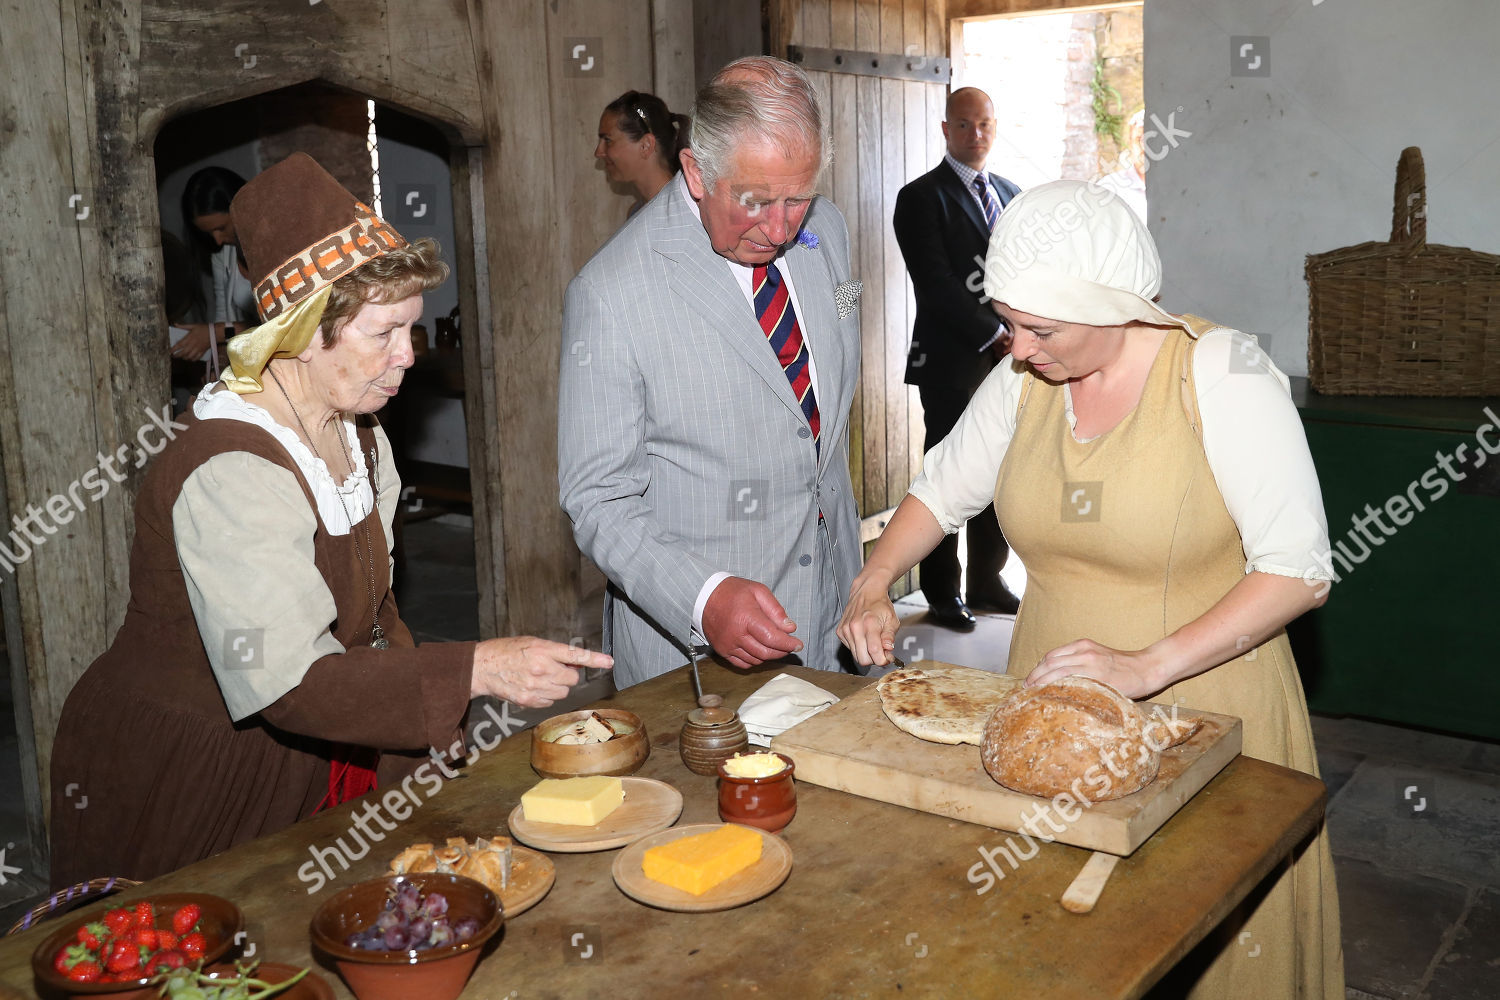 CASA REAL BRITÁNICA - Página 44 Prince-charles-and-camilla-duchess-of-cornwall-visit-to-wales-uk-shutterstock-editorial-9735835an